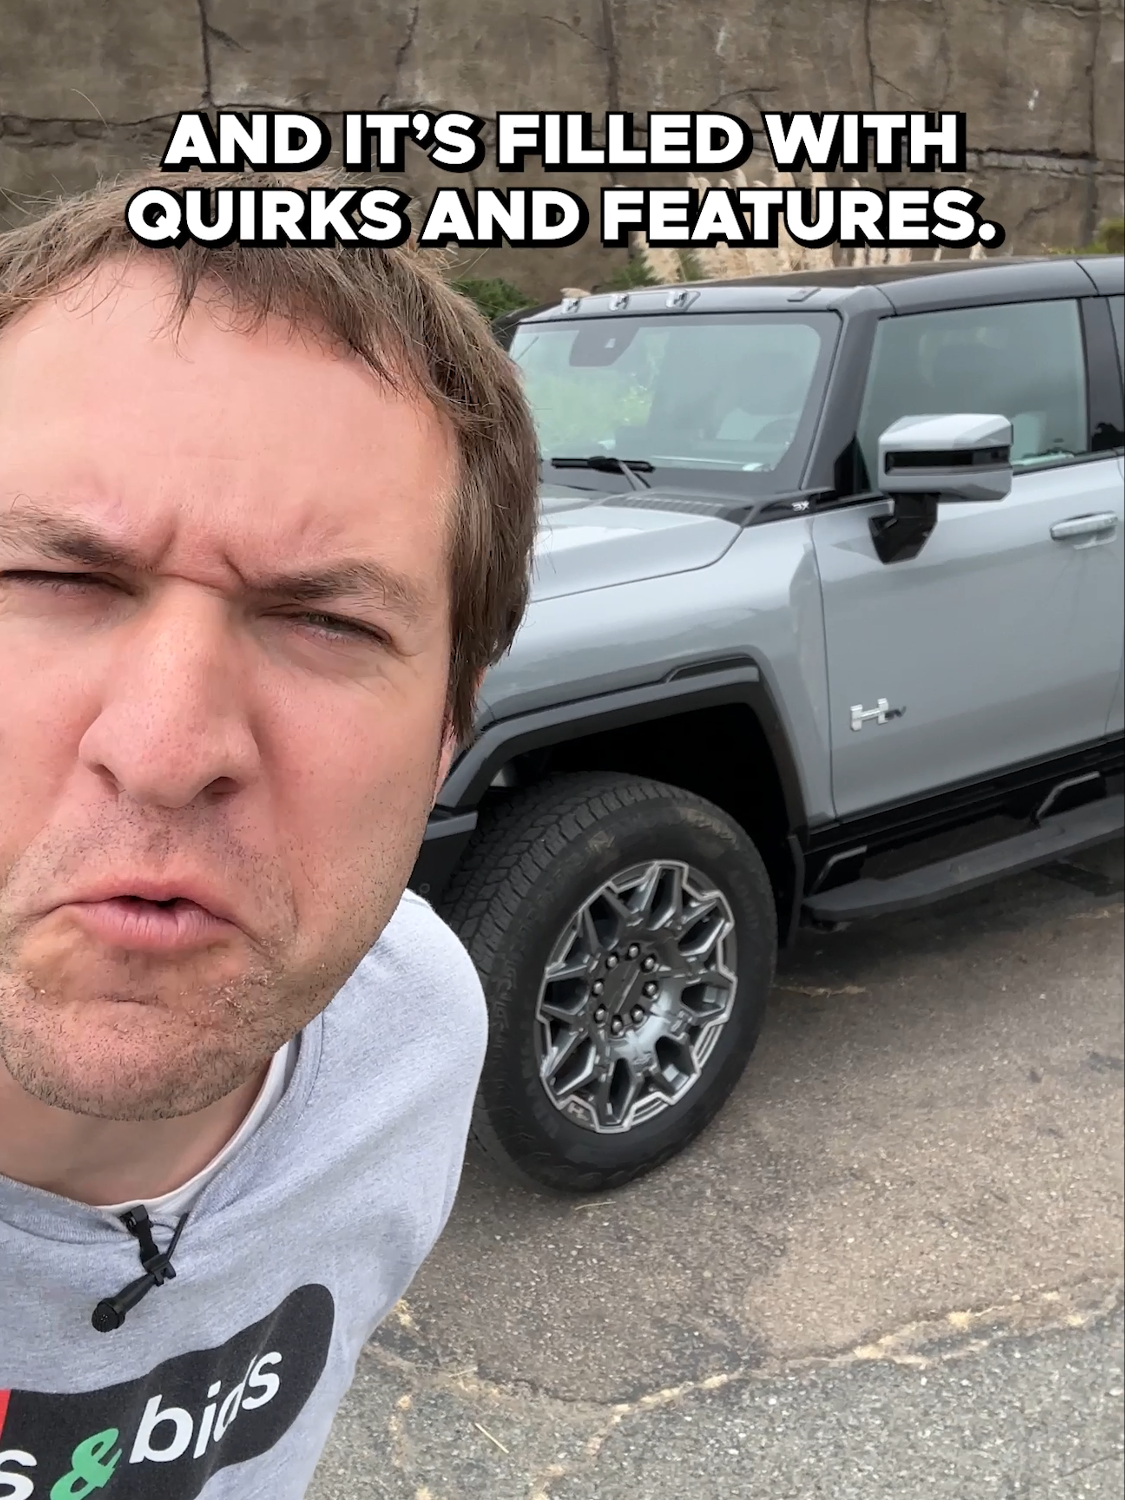 2024 GMC Hummer EV SUV quirks and features! THIS… is a 2024 GMC Hummer EV SUV –  A $110,000 beast that nobody will buy!⁠ Go watch Doug DeMuro dive into the new Hummer EV SUV in detail in his full review! ⁠ #reels #carsandbids #dougdemuro #gmc #hummer #hummerev #ev #electricvehicles #electriccars #carsnoonewillbuy #crabwalk #quirksandfeatures #gmchummer #newcars #cars #carsoftiktok #tiktok